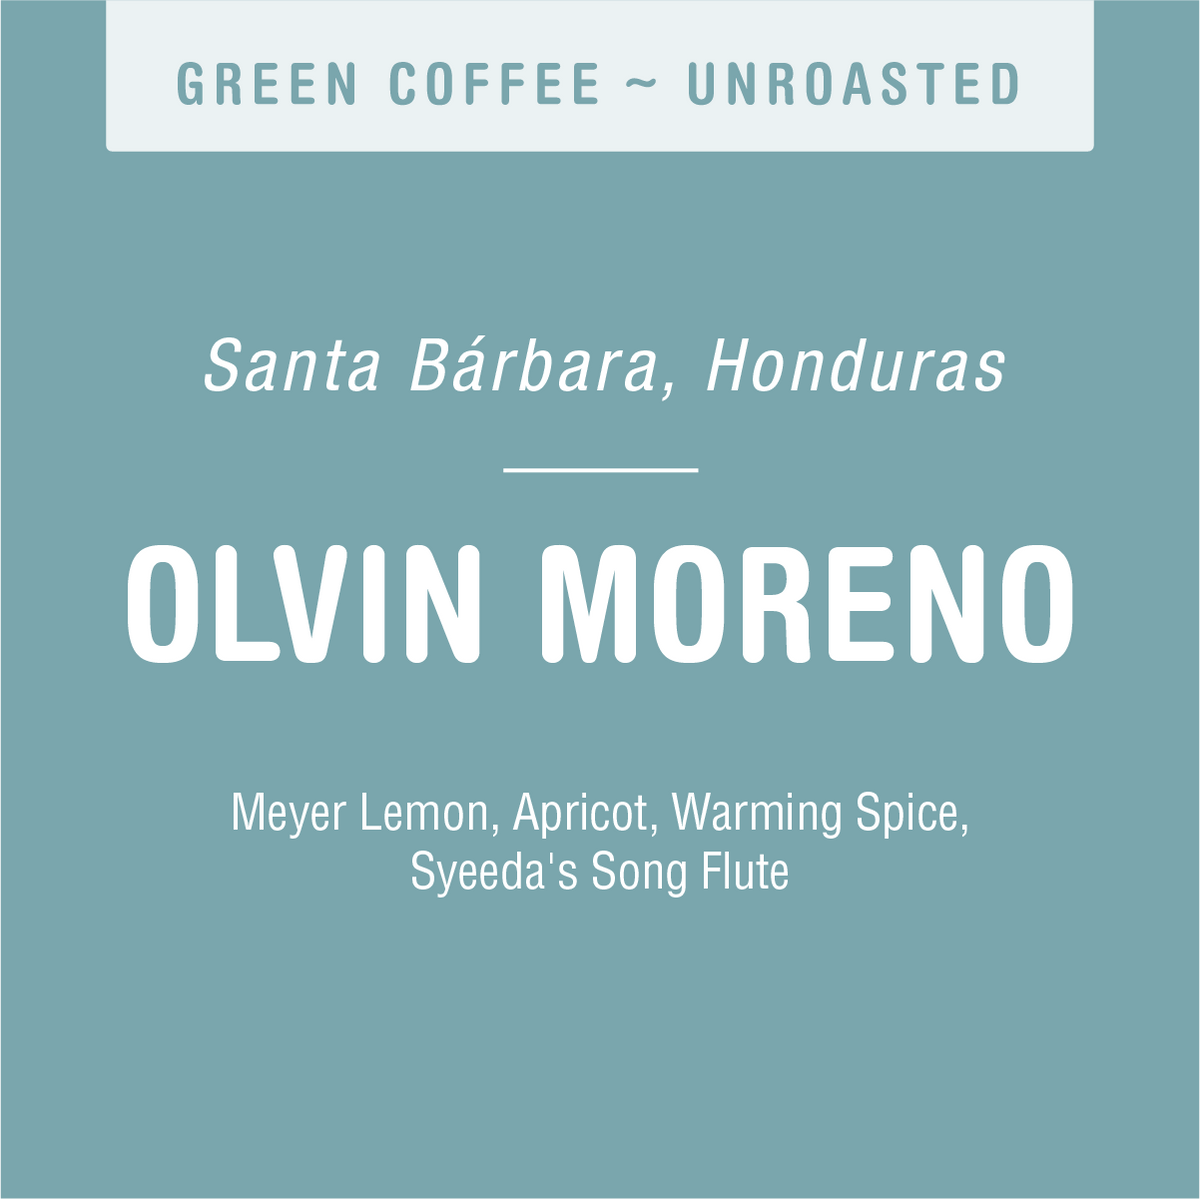 A teal-colored label for unroasted green coffee from Santa Bárbara, Honduras. It features the name "Olvin Moreno (GREEN)," a dedicated coffee farmer, and describes flavor notes including Meyer lemon, apricot, warming spice, and Syeeda's Song flute—highlighting one of Tandem Coffee Roasters' unique and complex coffees.